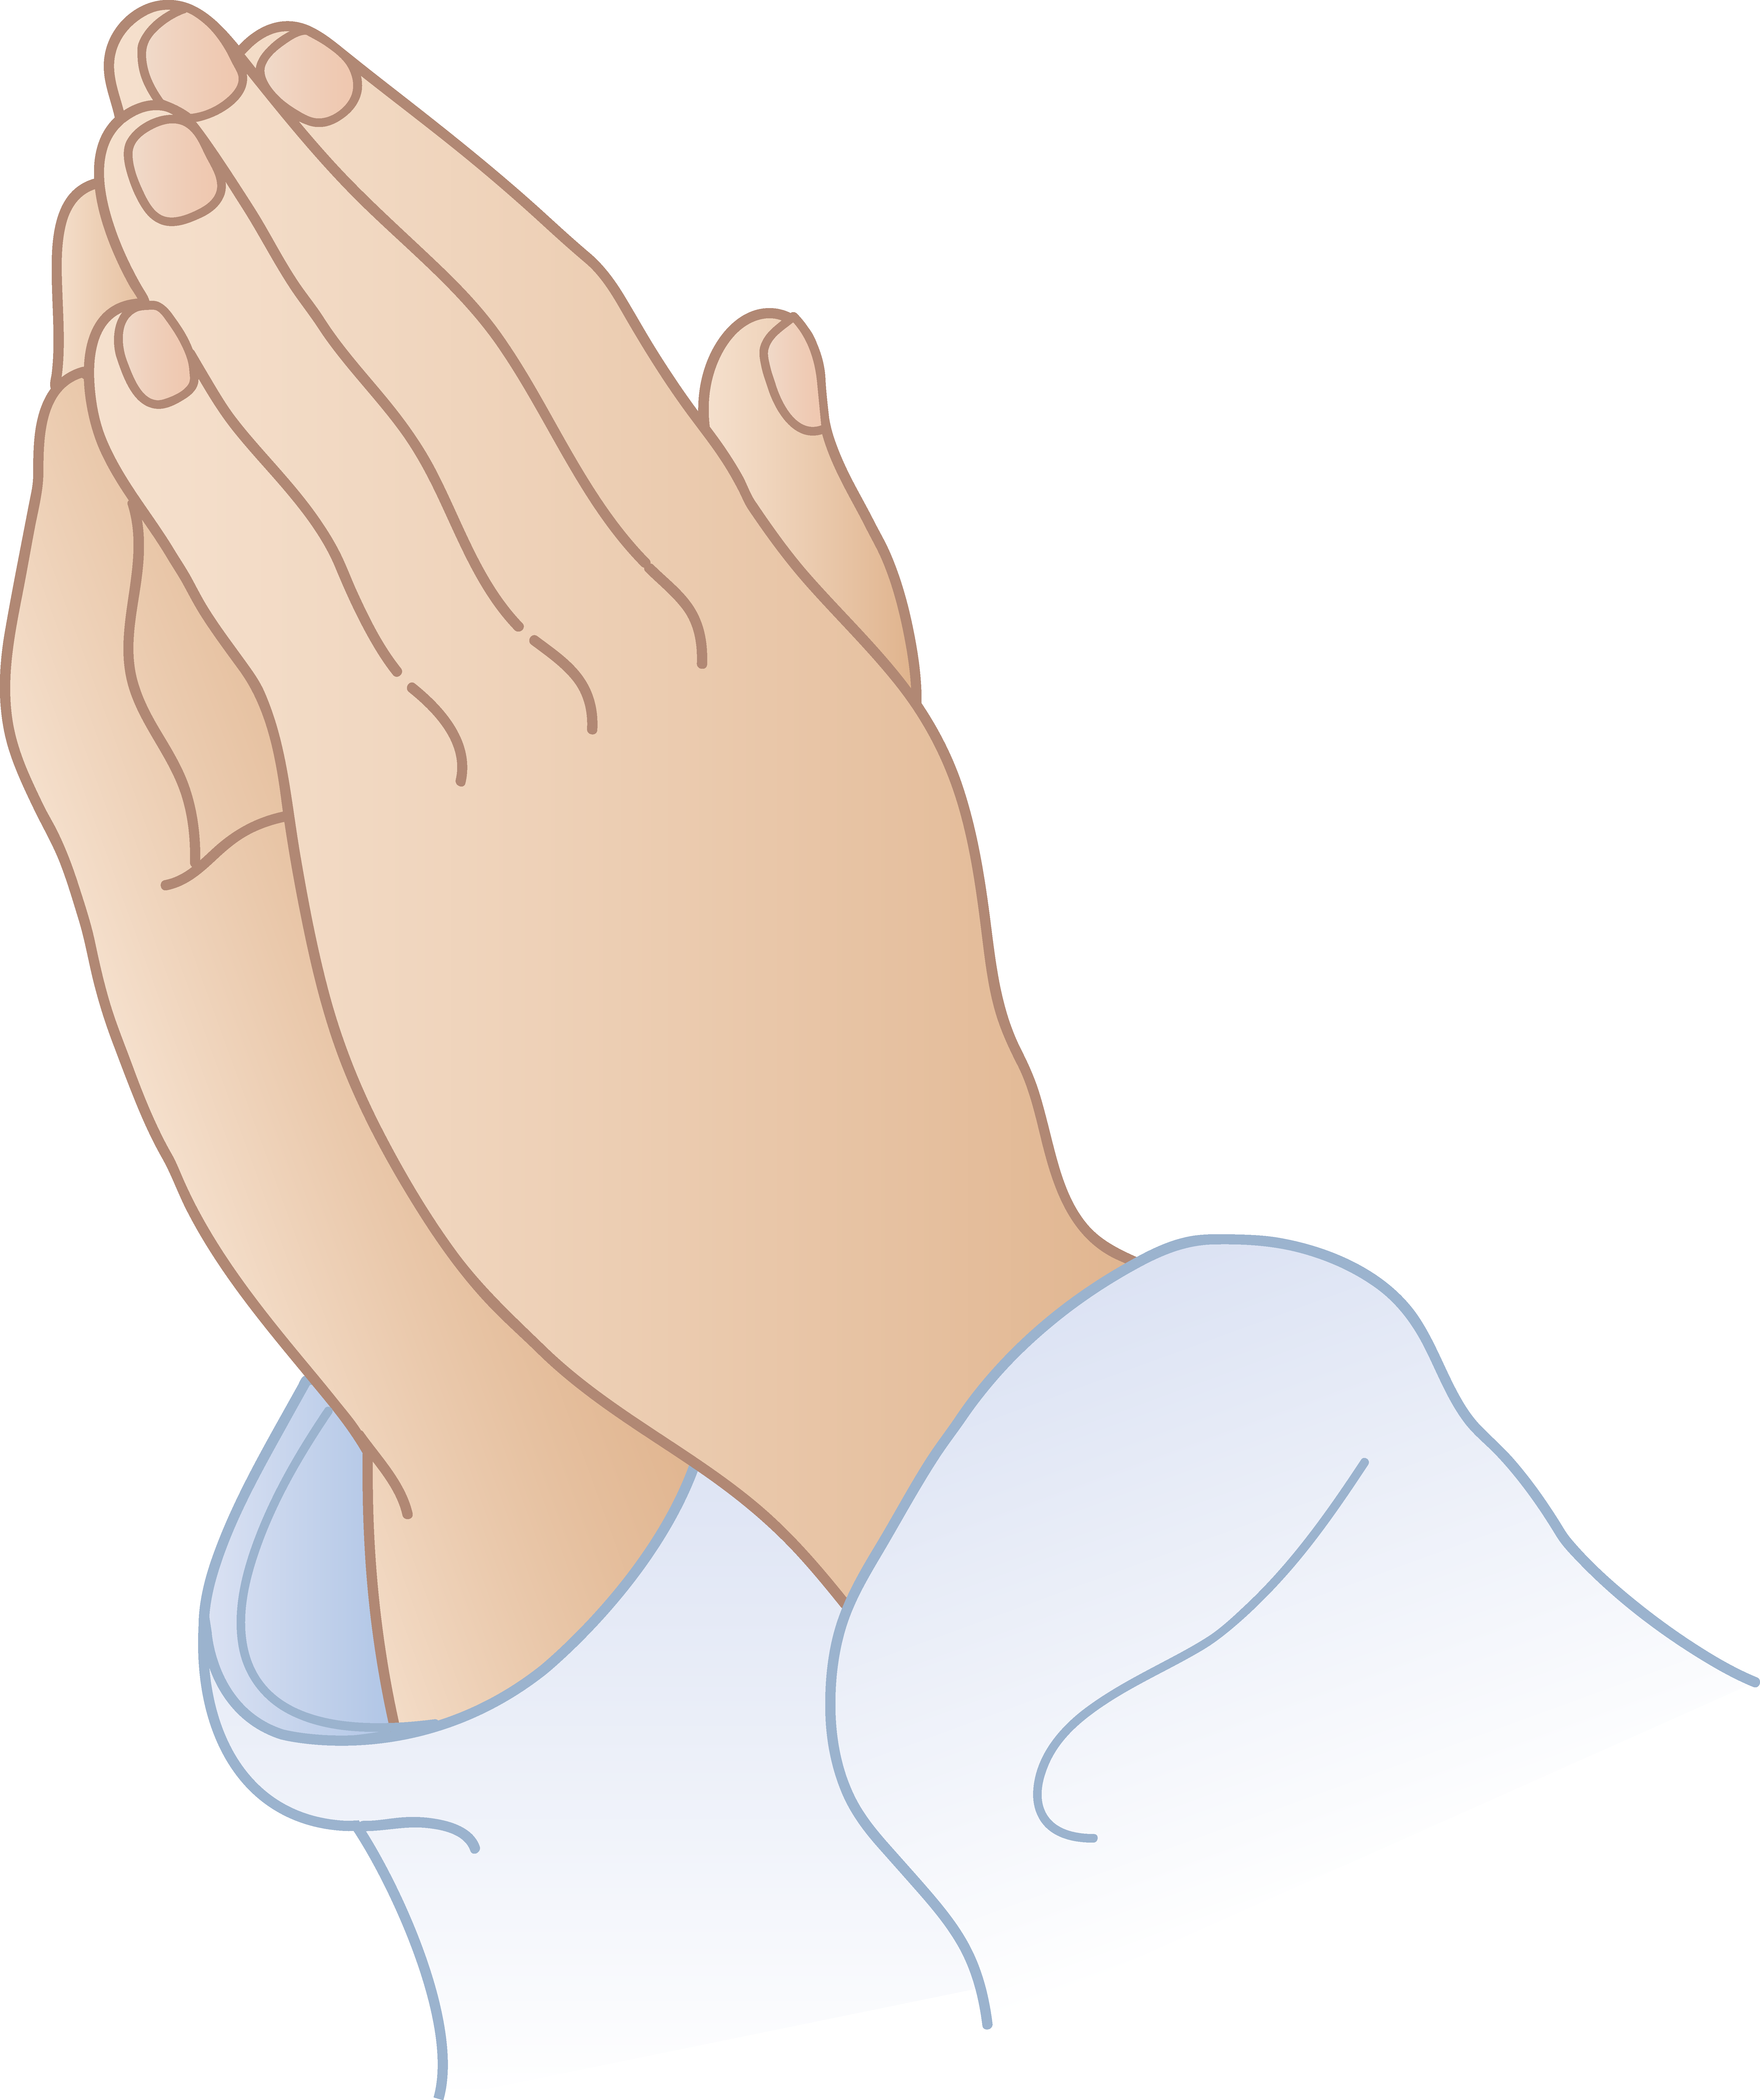 Praying hands free clip. Finger clipart blessing hand